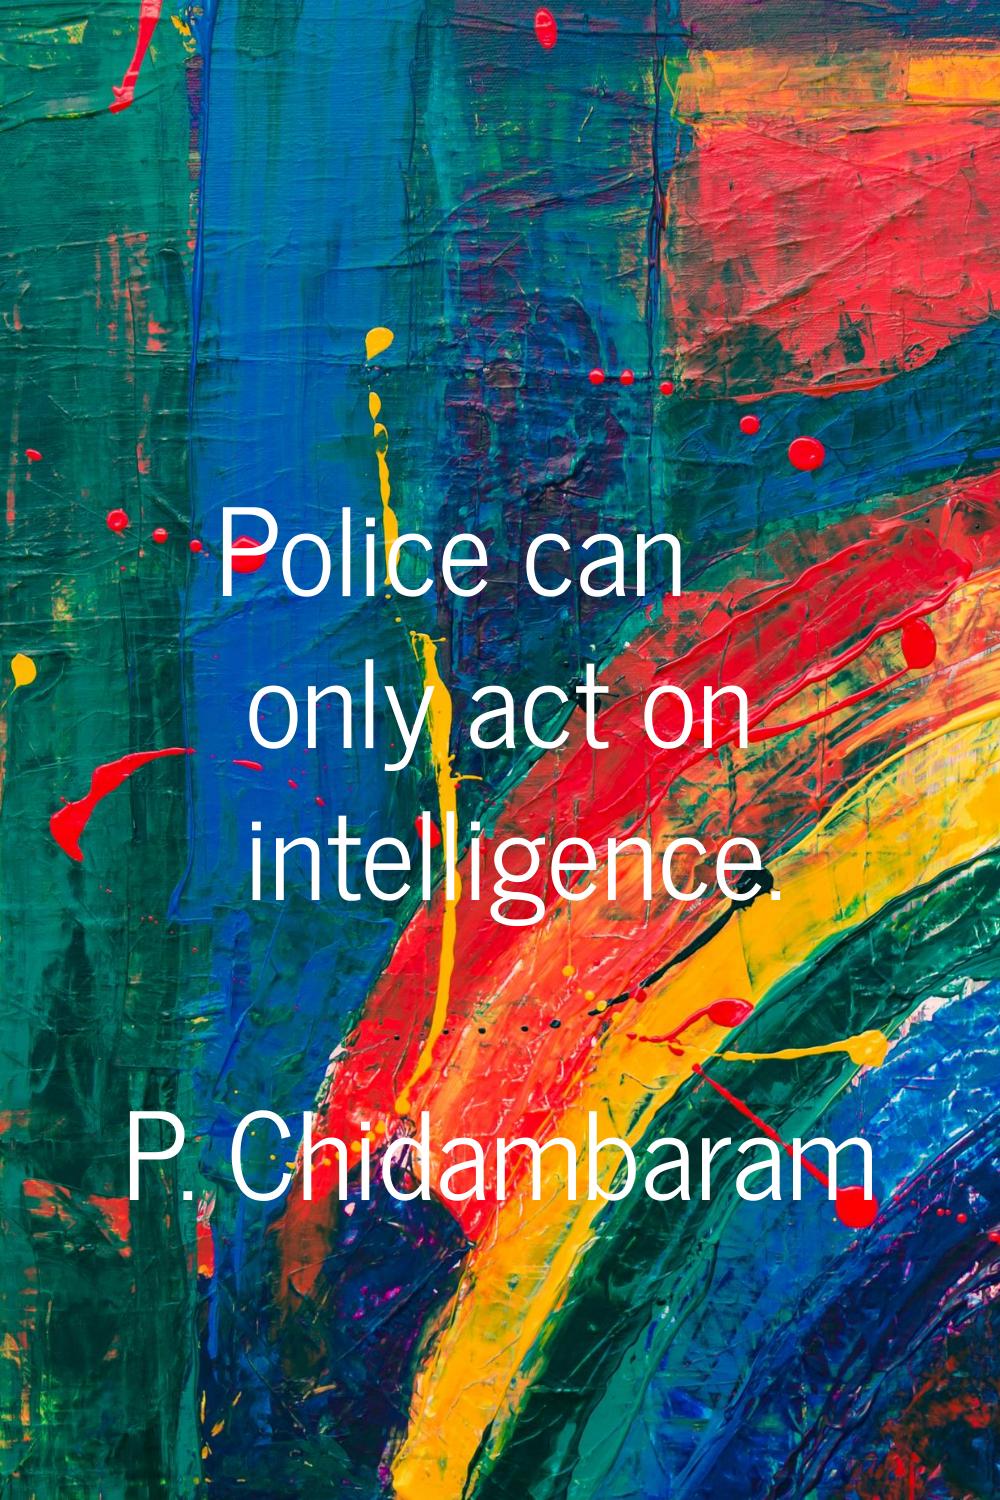 Police can only act on intelligence.